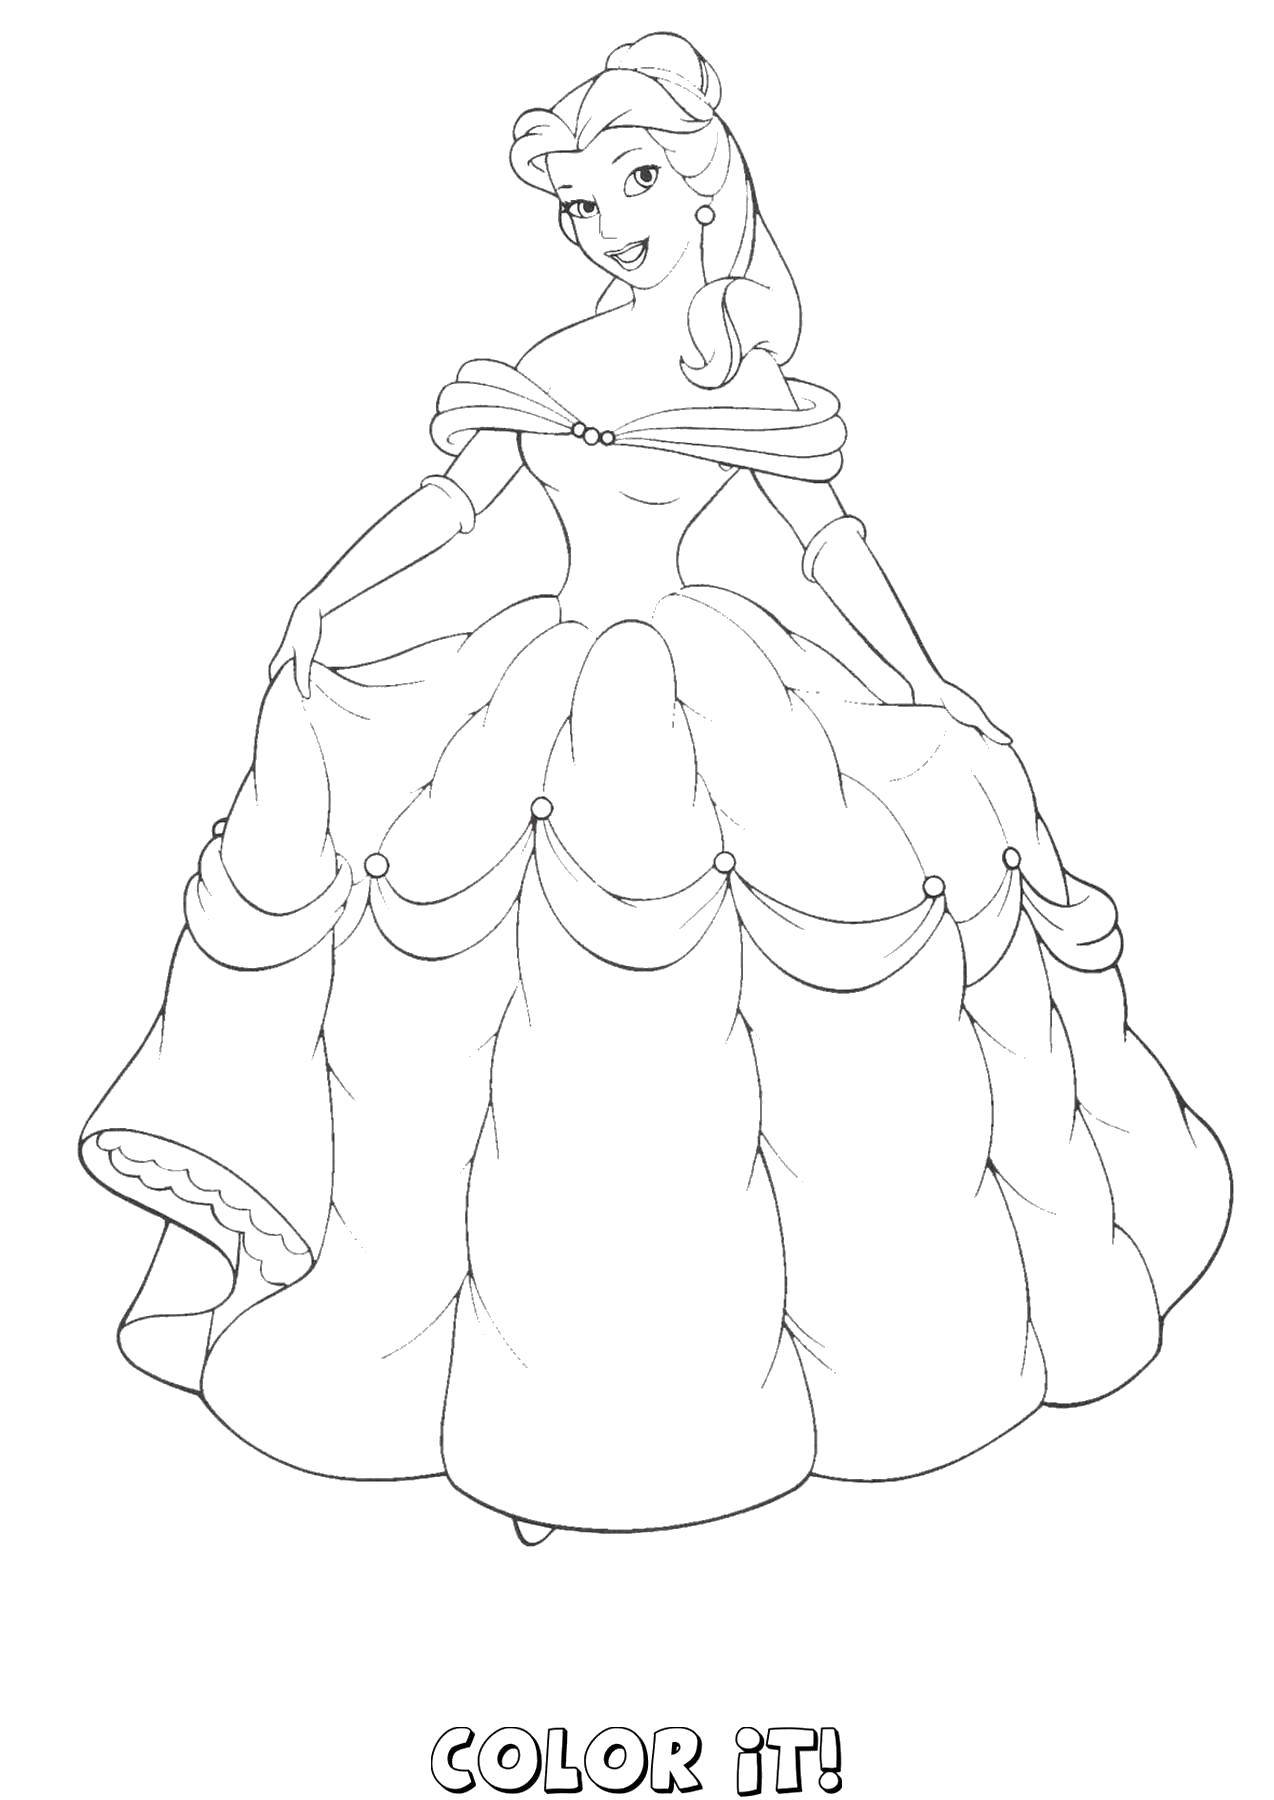 Coloring Belle like her dress. Category Princess. Tags:  Beauty and the Beast, Disney.